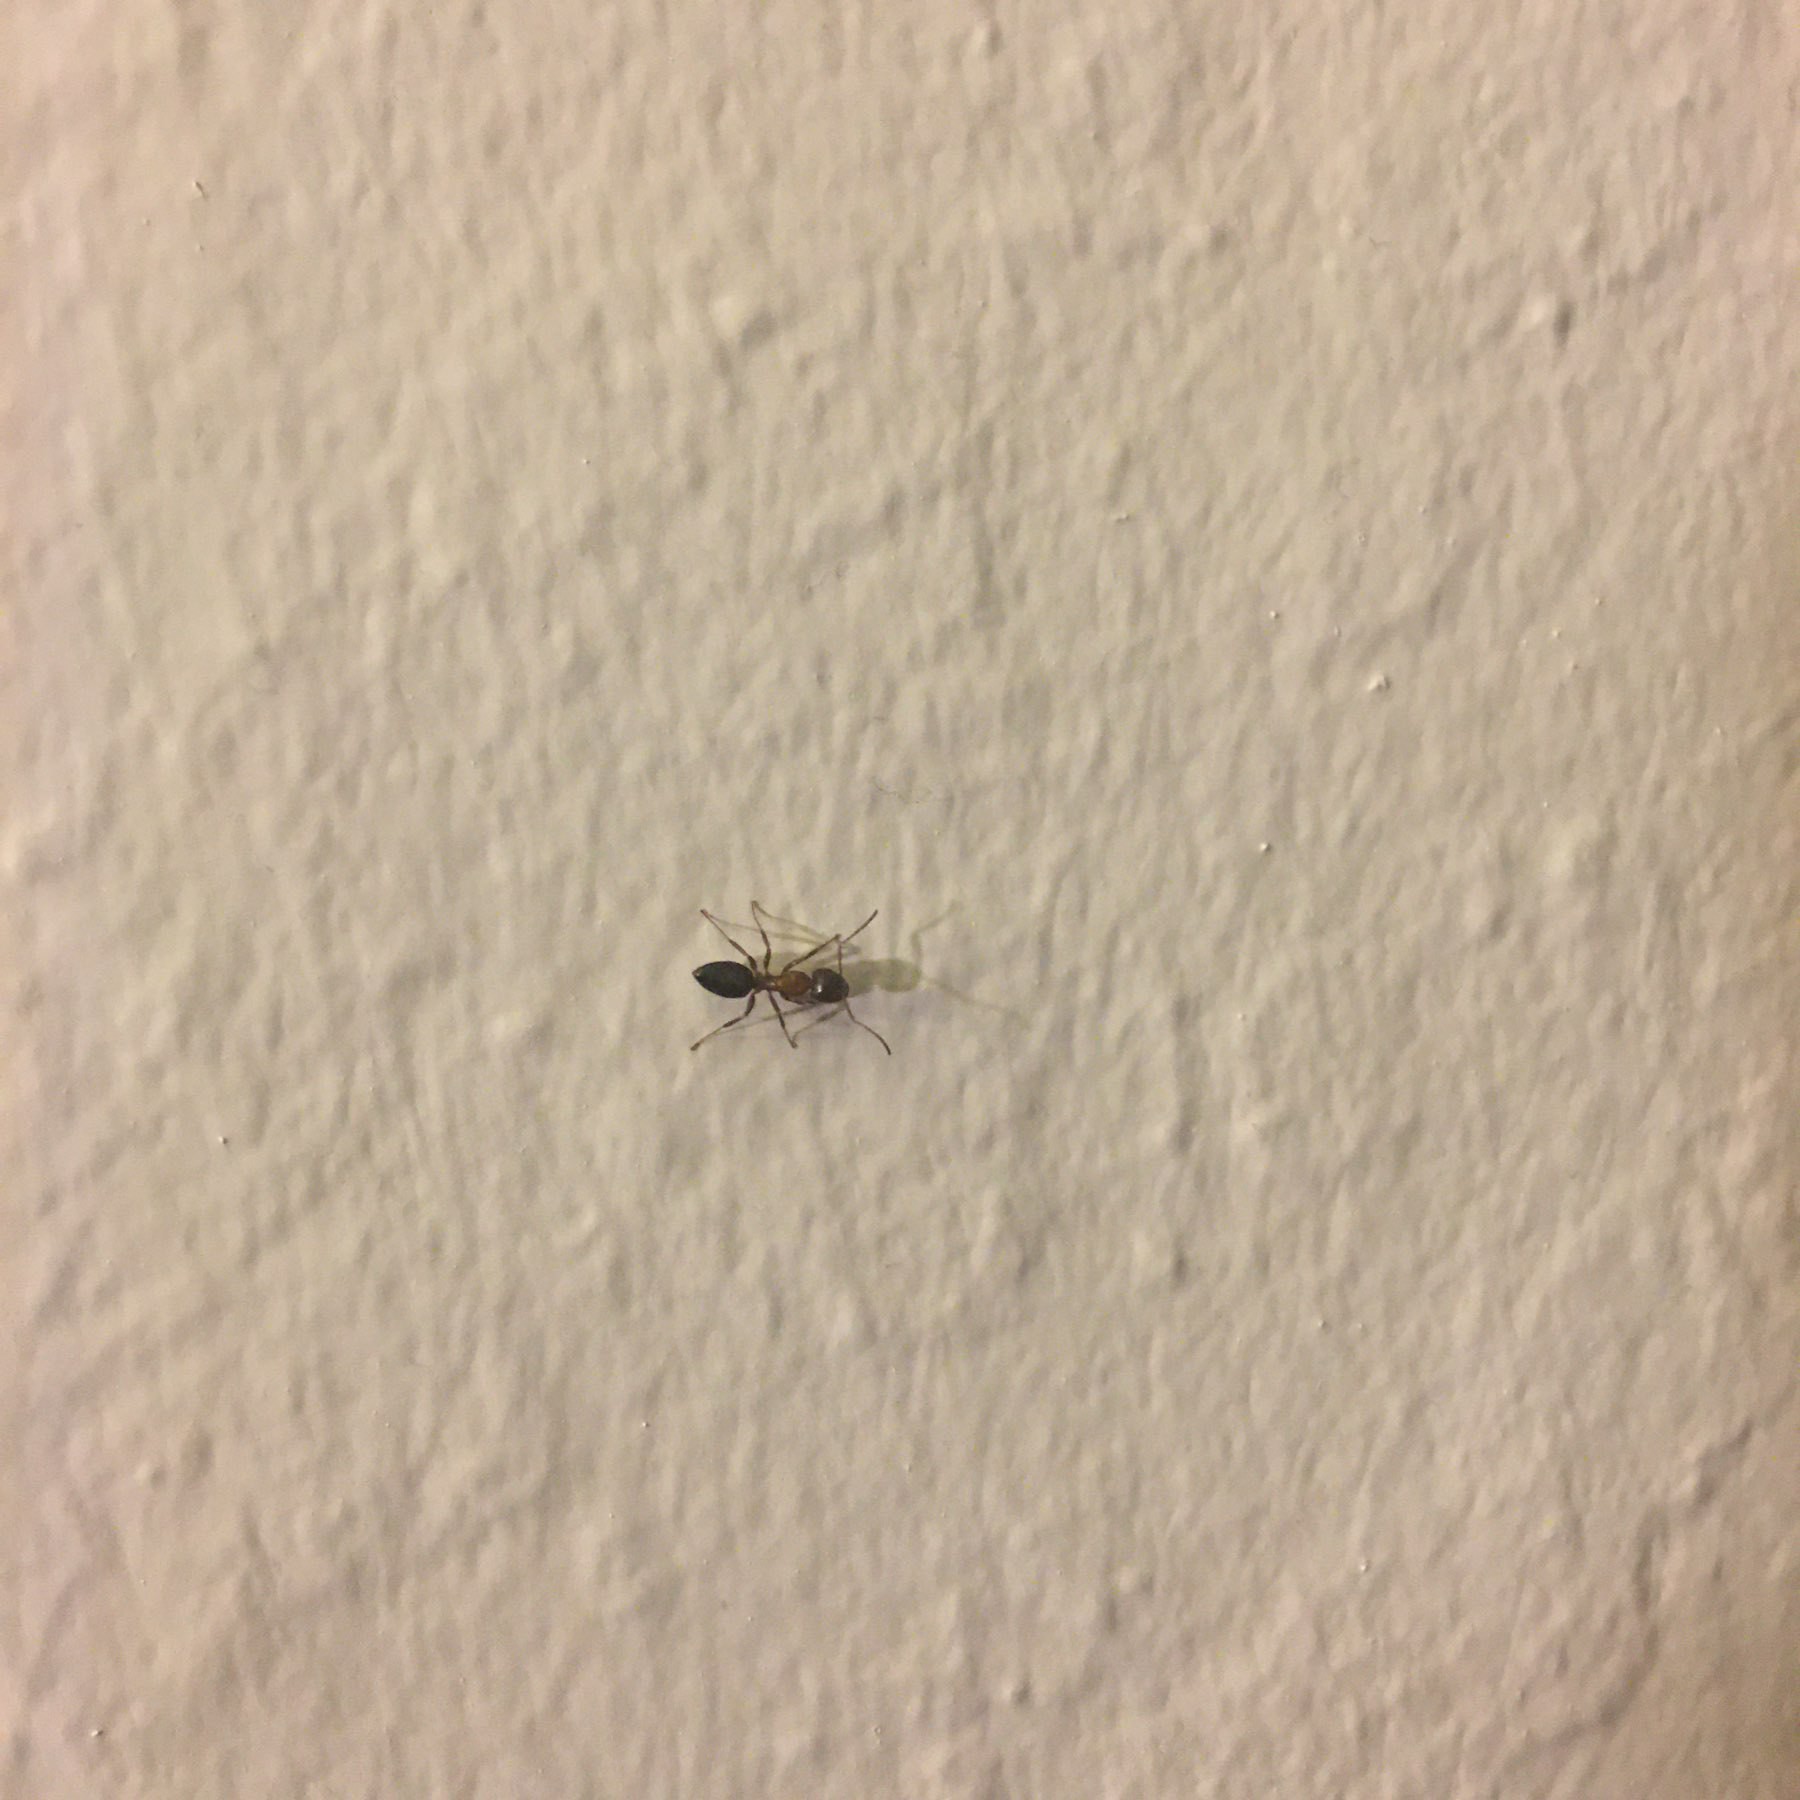 Ant crawling on a wall. 